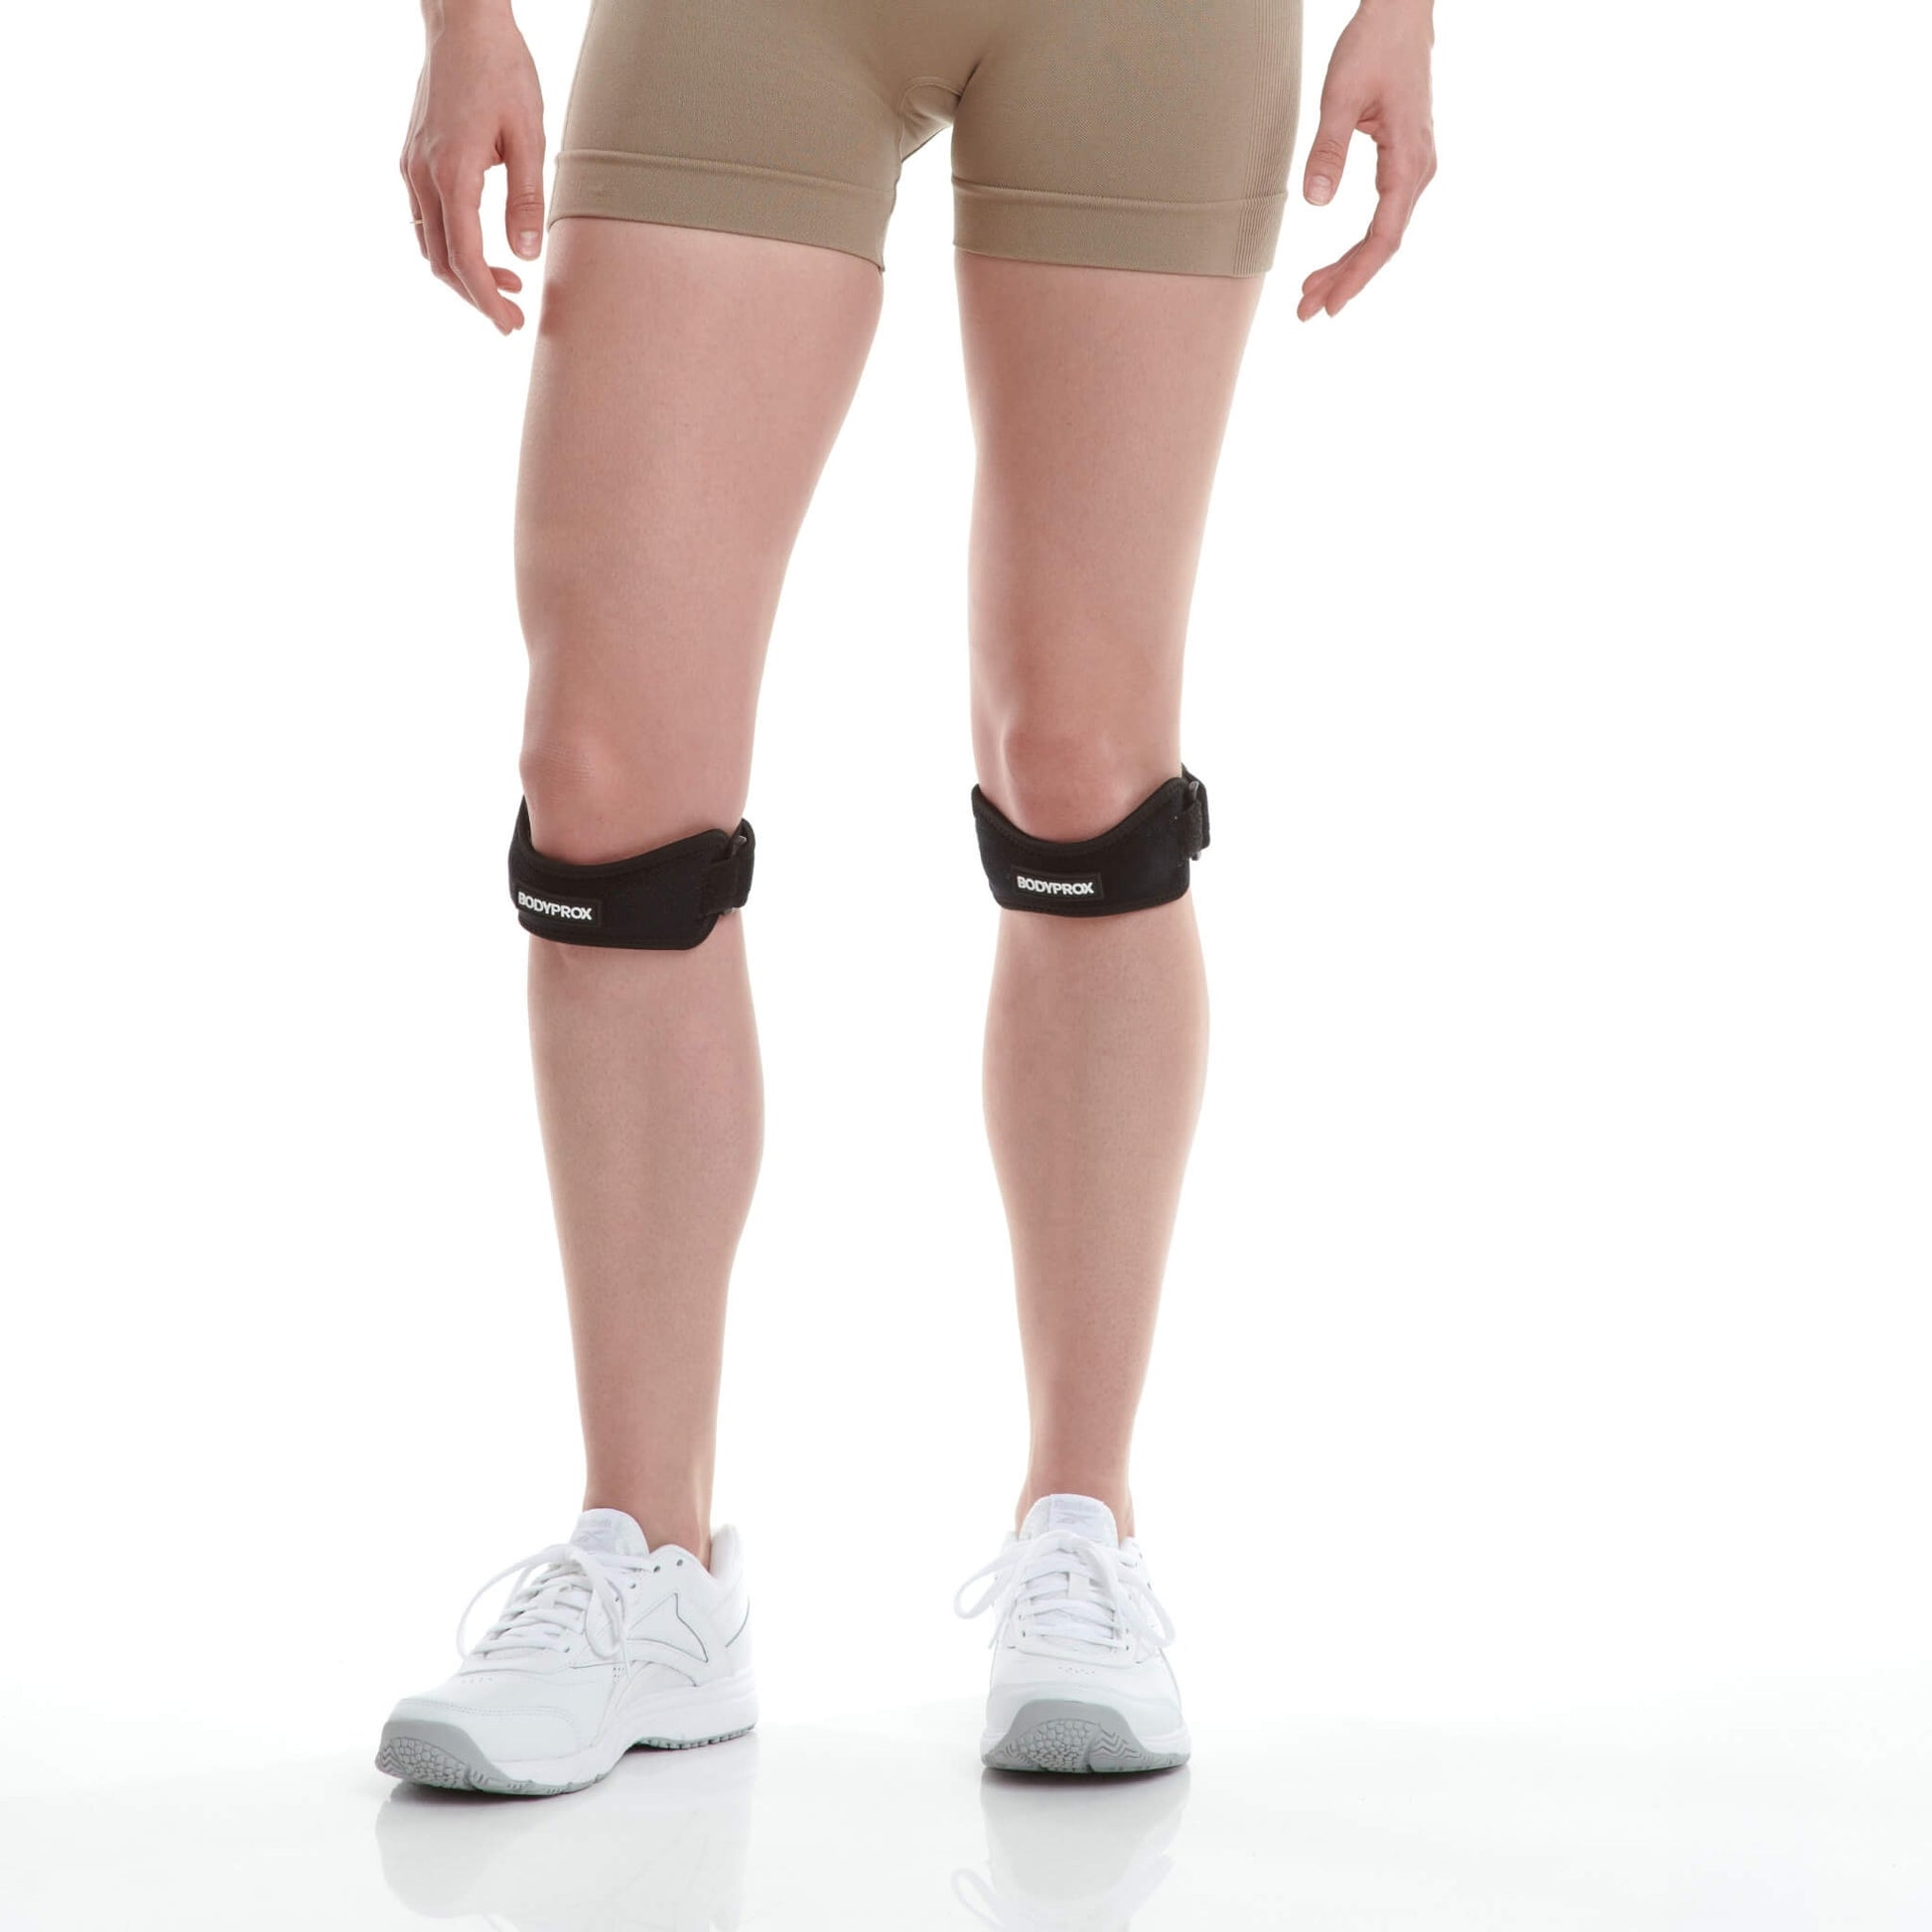 Big Knee Brace for Large Legs, Plus Size Patella Support Sleeve with  Adjustable Thigh & Calf Straps